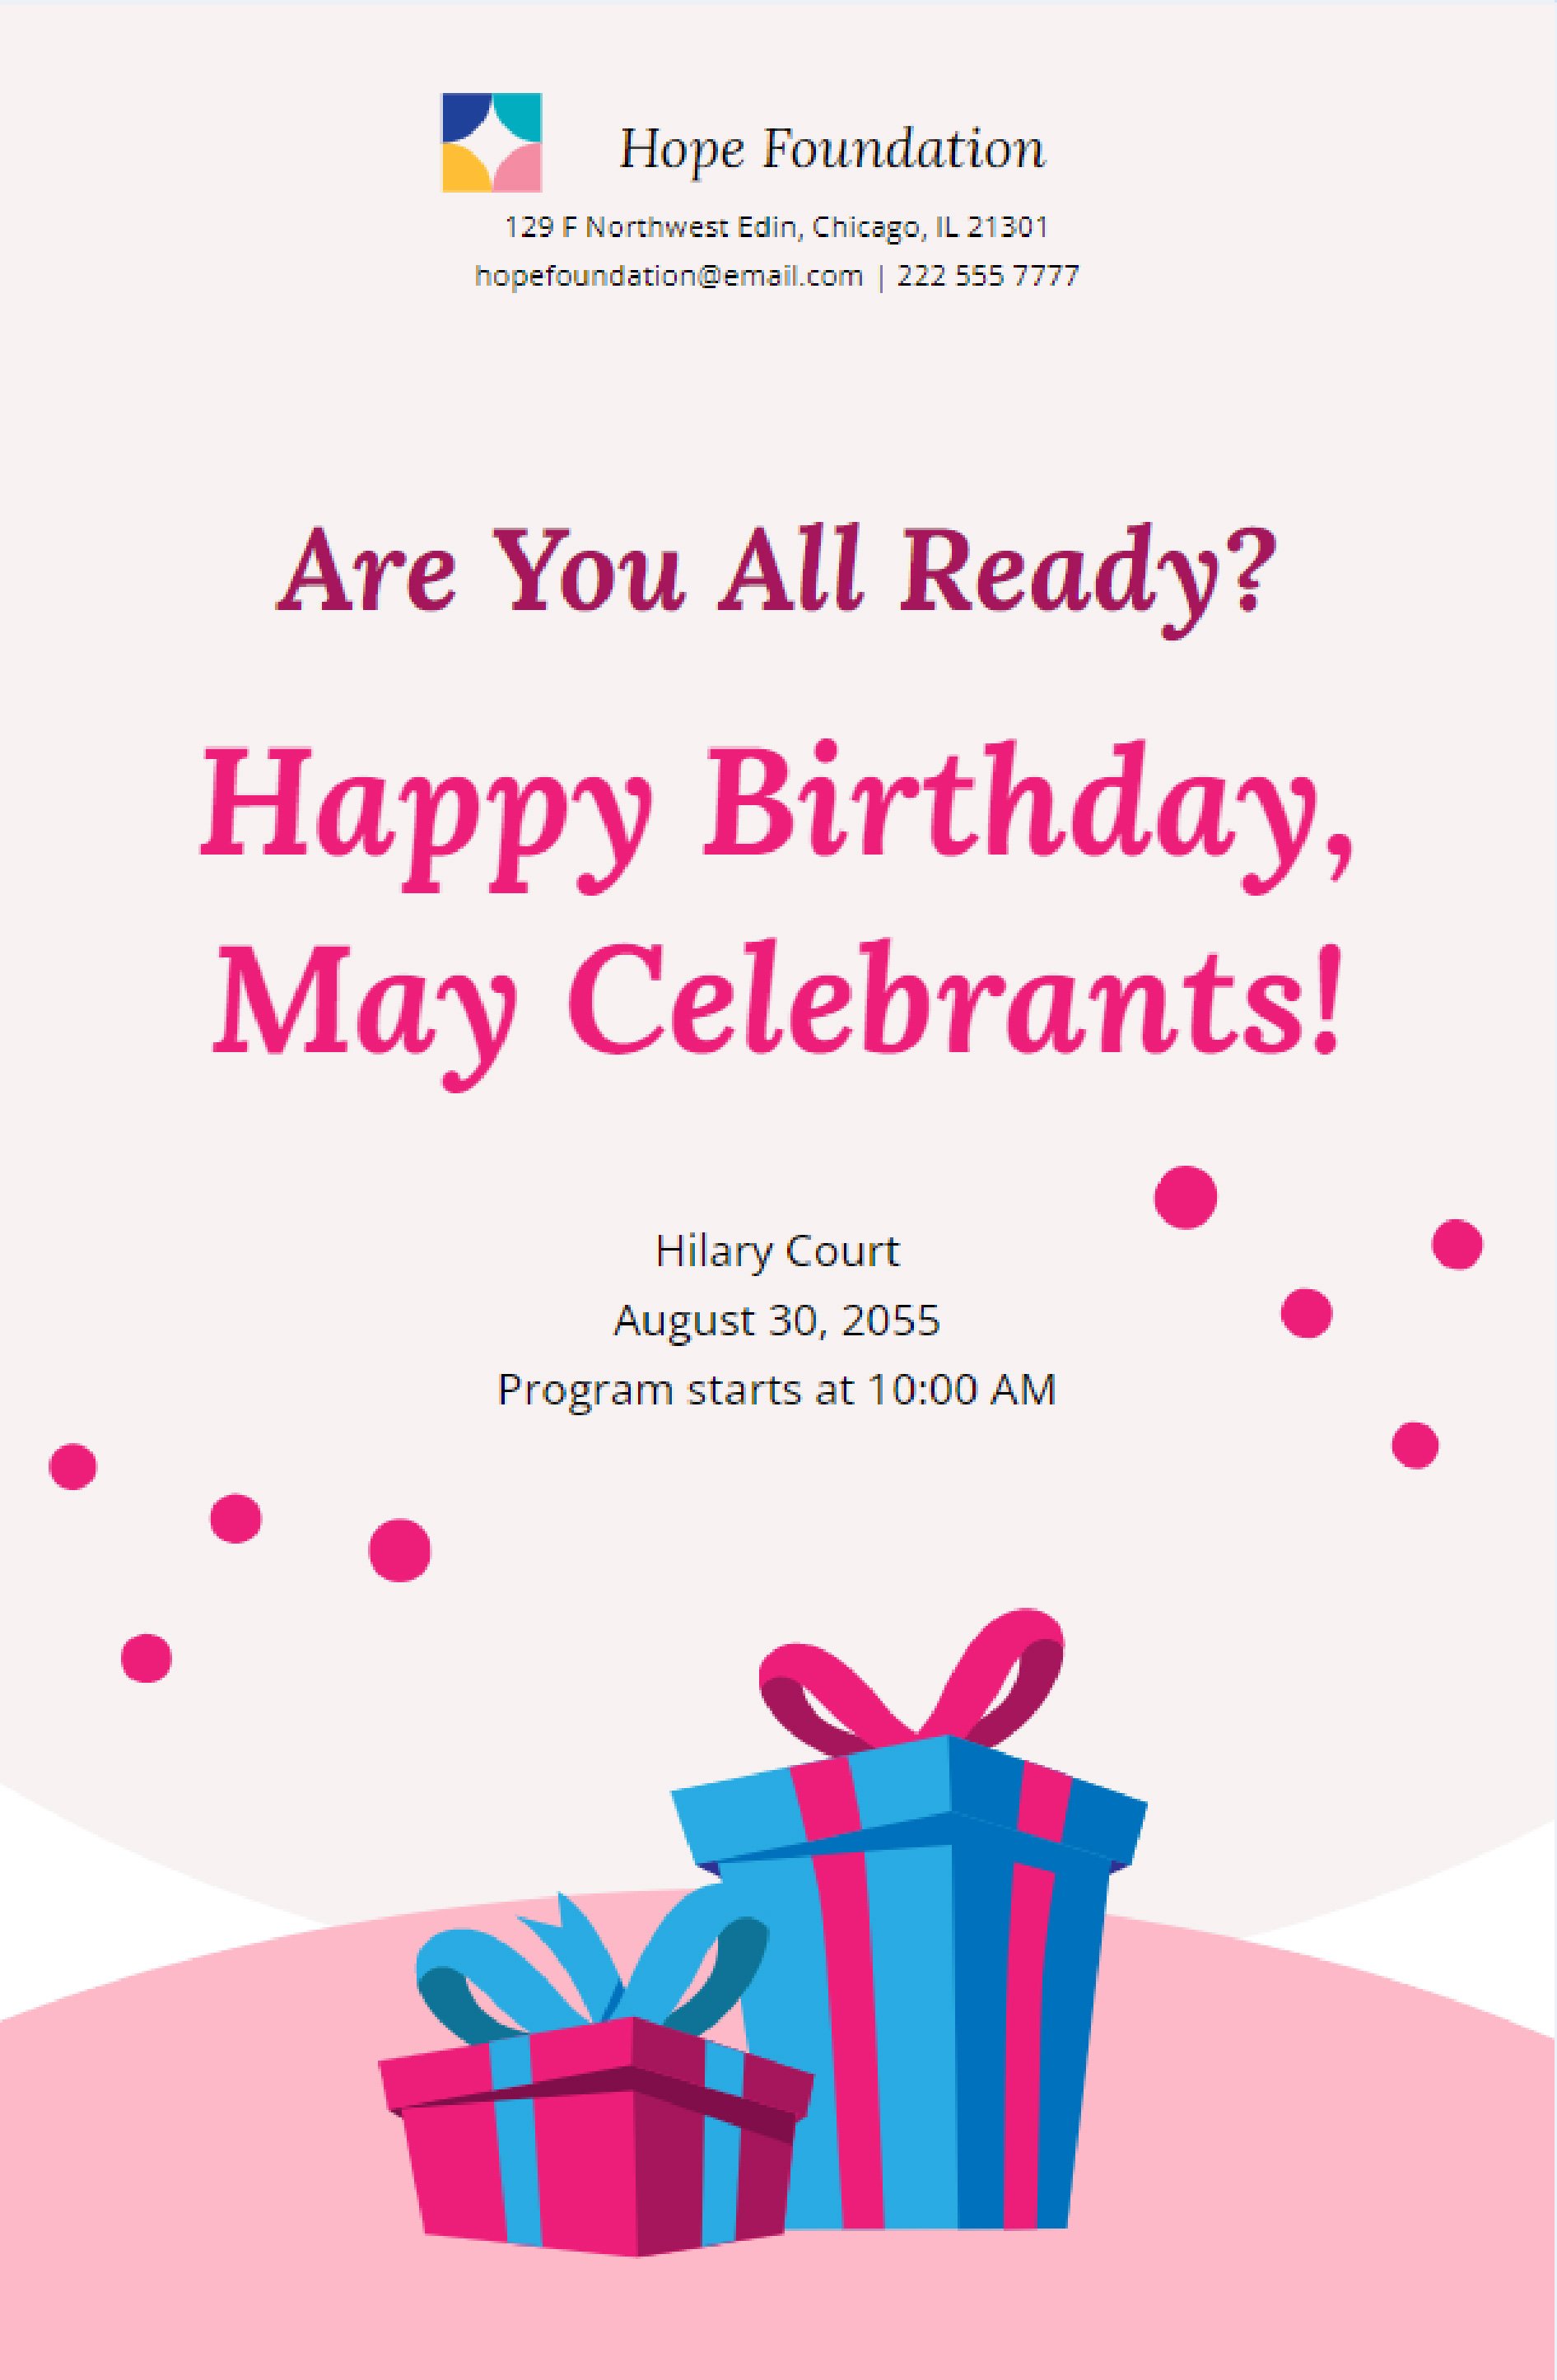 Happy Birthday Poster Template in Word, Illustrator, PSD